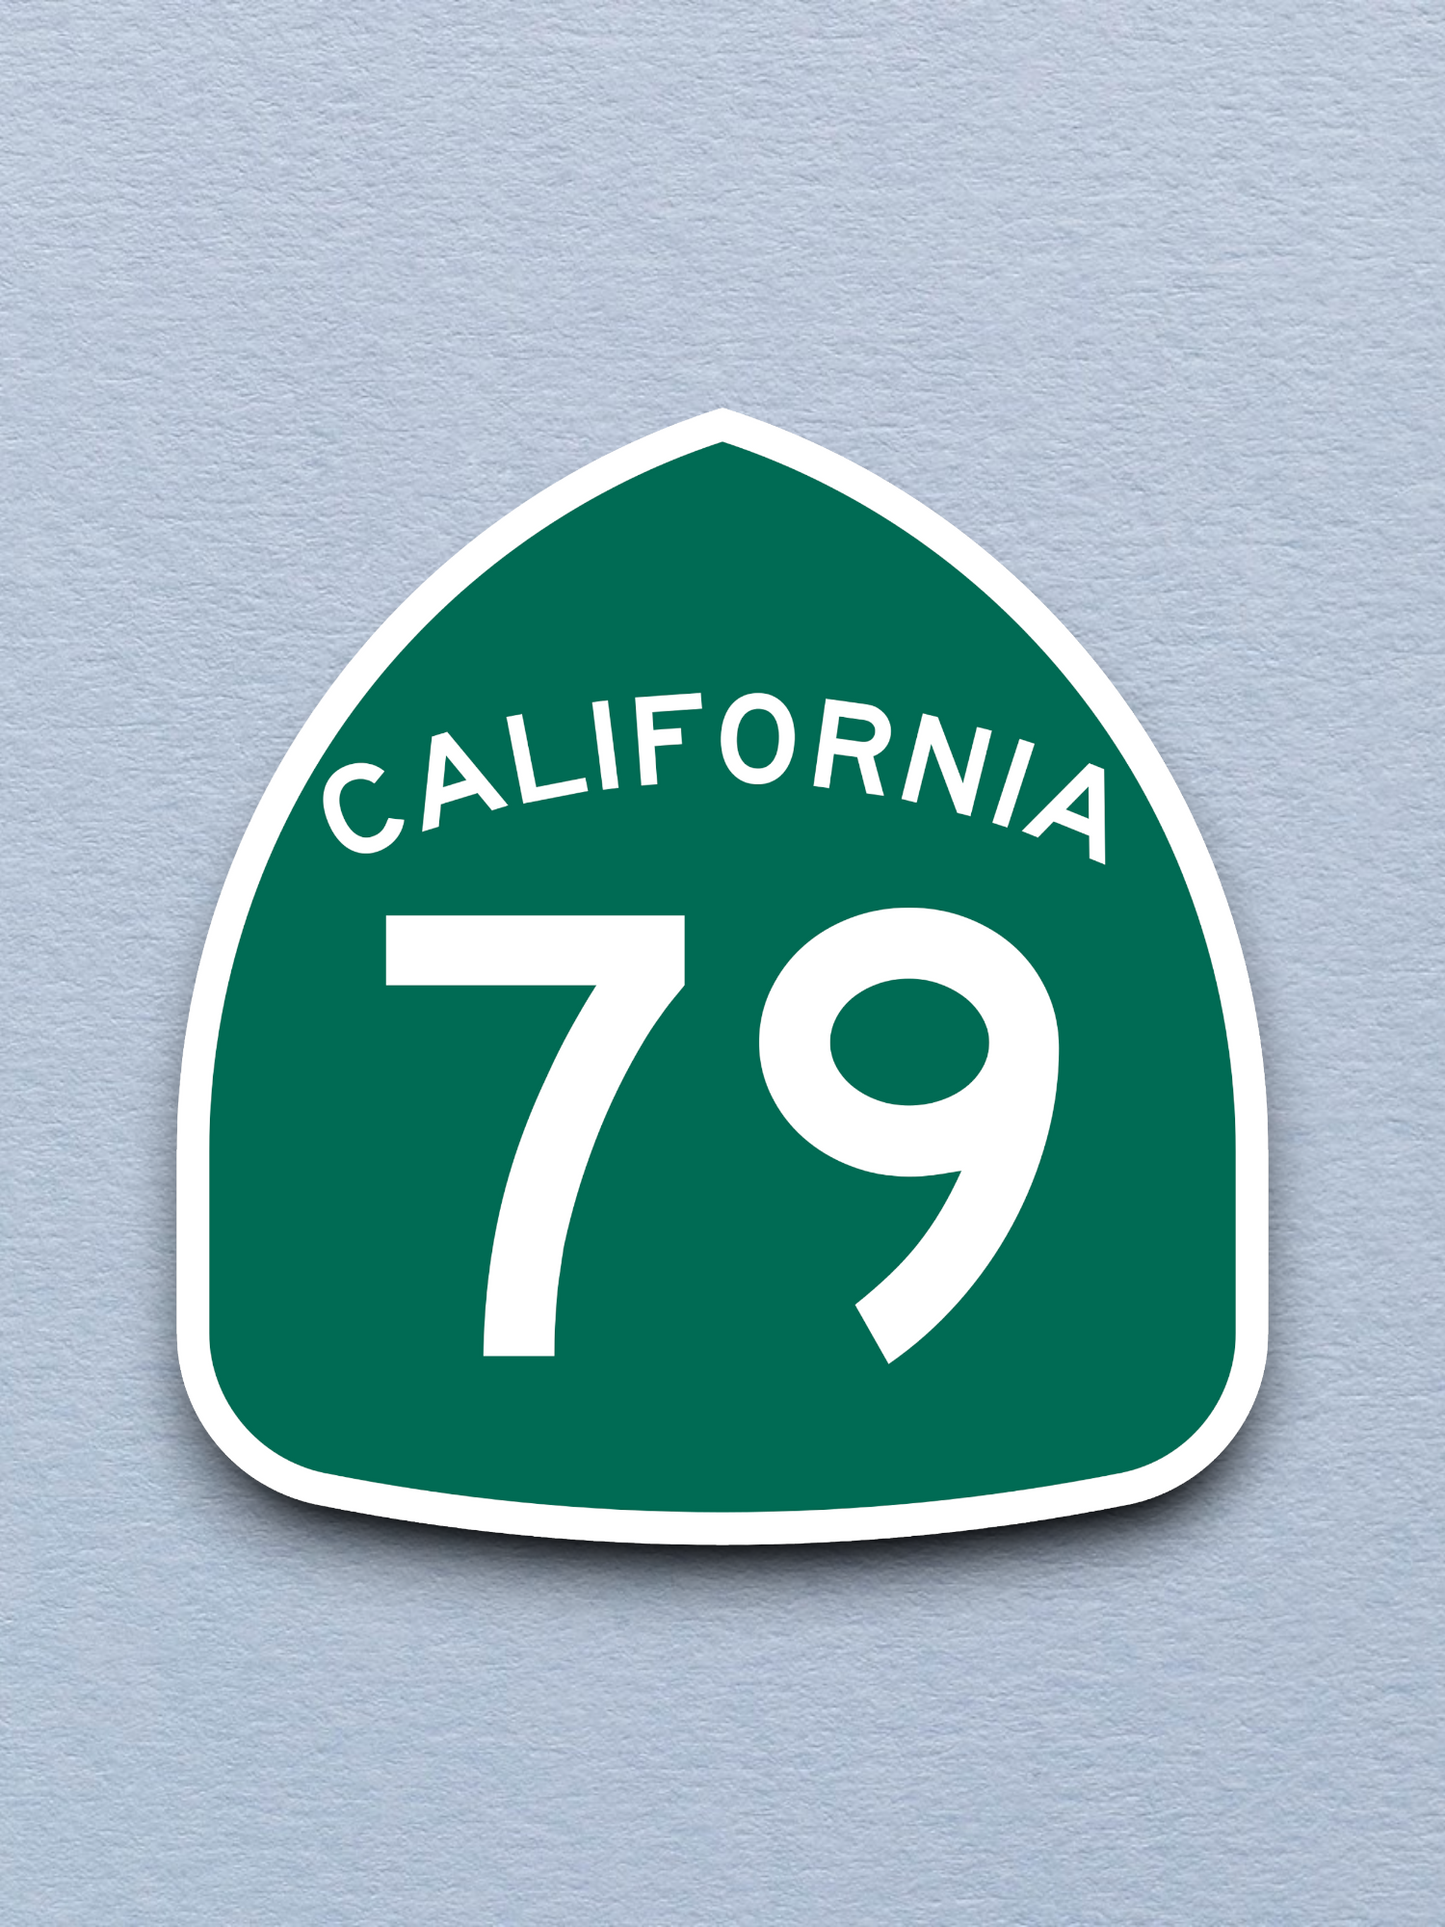 California State Route 79 Road Sign Sticker